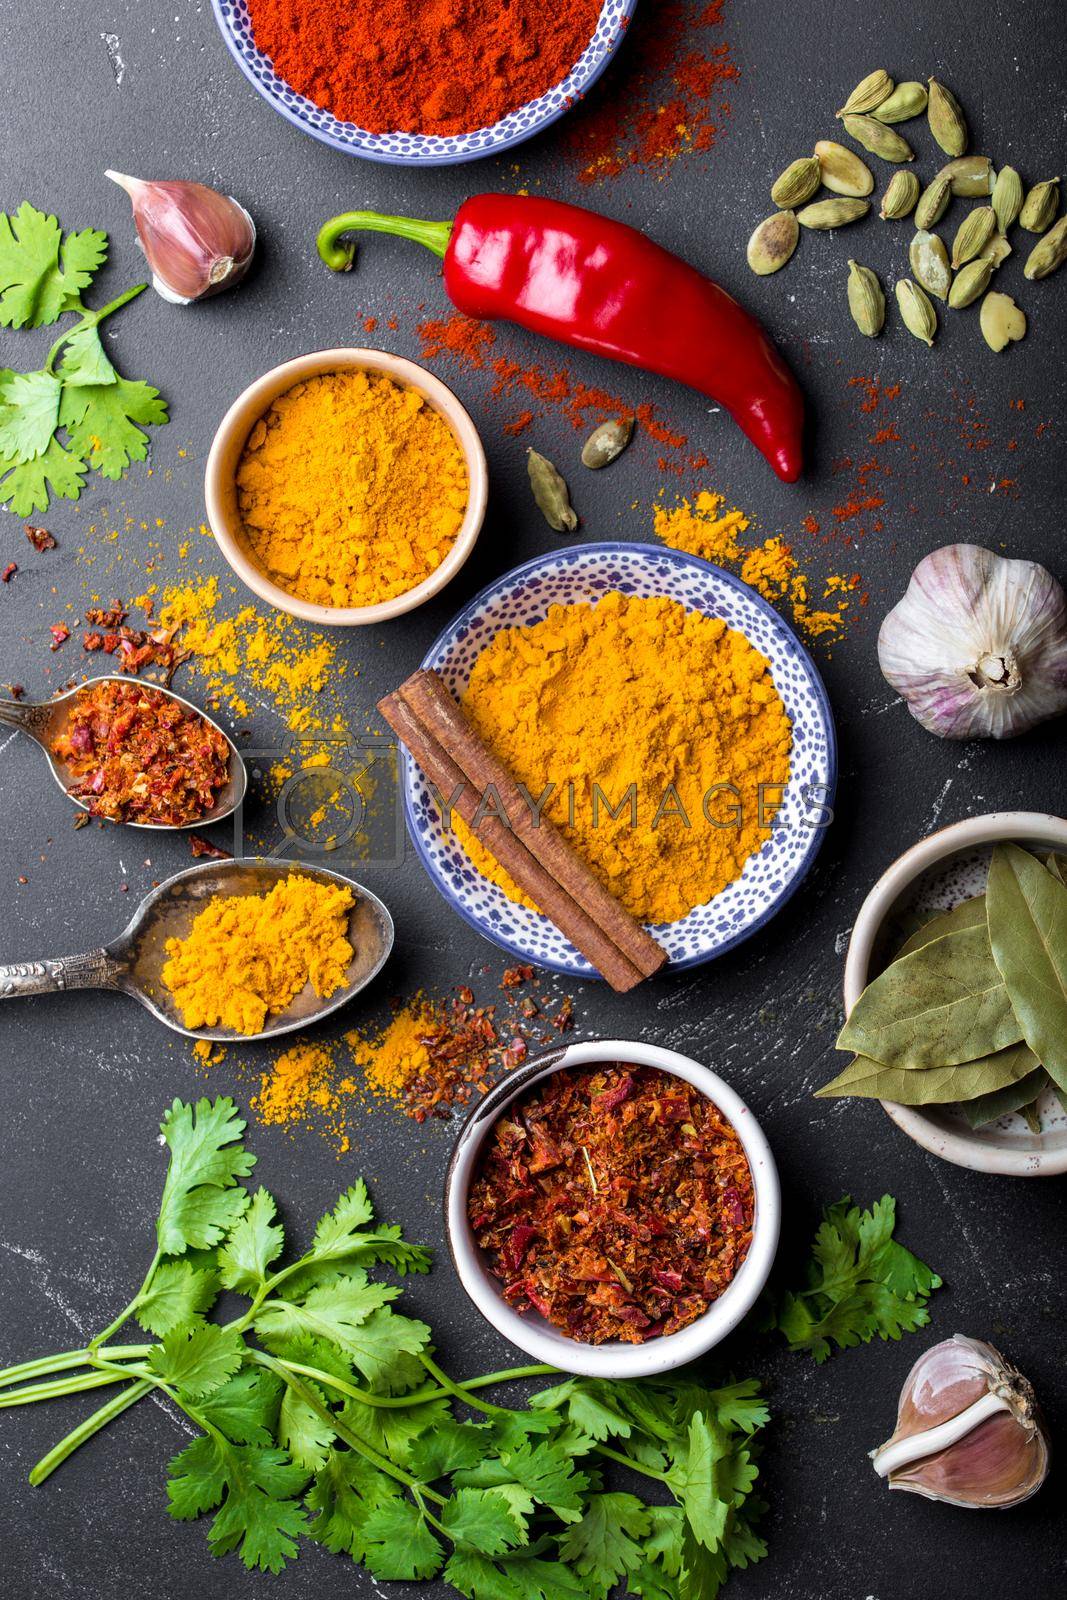 Set of Indian food cooking ingredients. Traditional Indian assorted spices and herbs. Curry, turmeric, cardamom, garlic, pepper, cilantro, cinnamon. Preparing exotic meal. Top view, close up